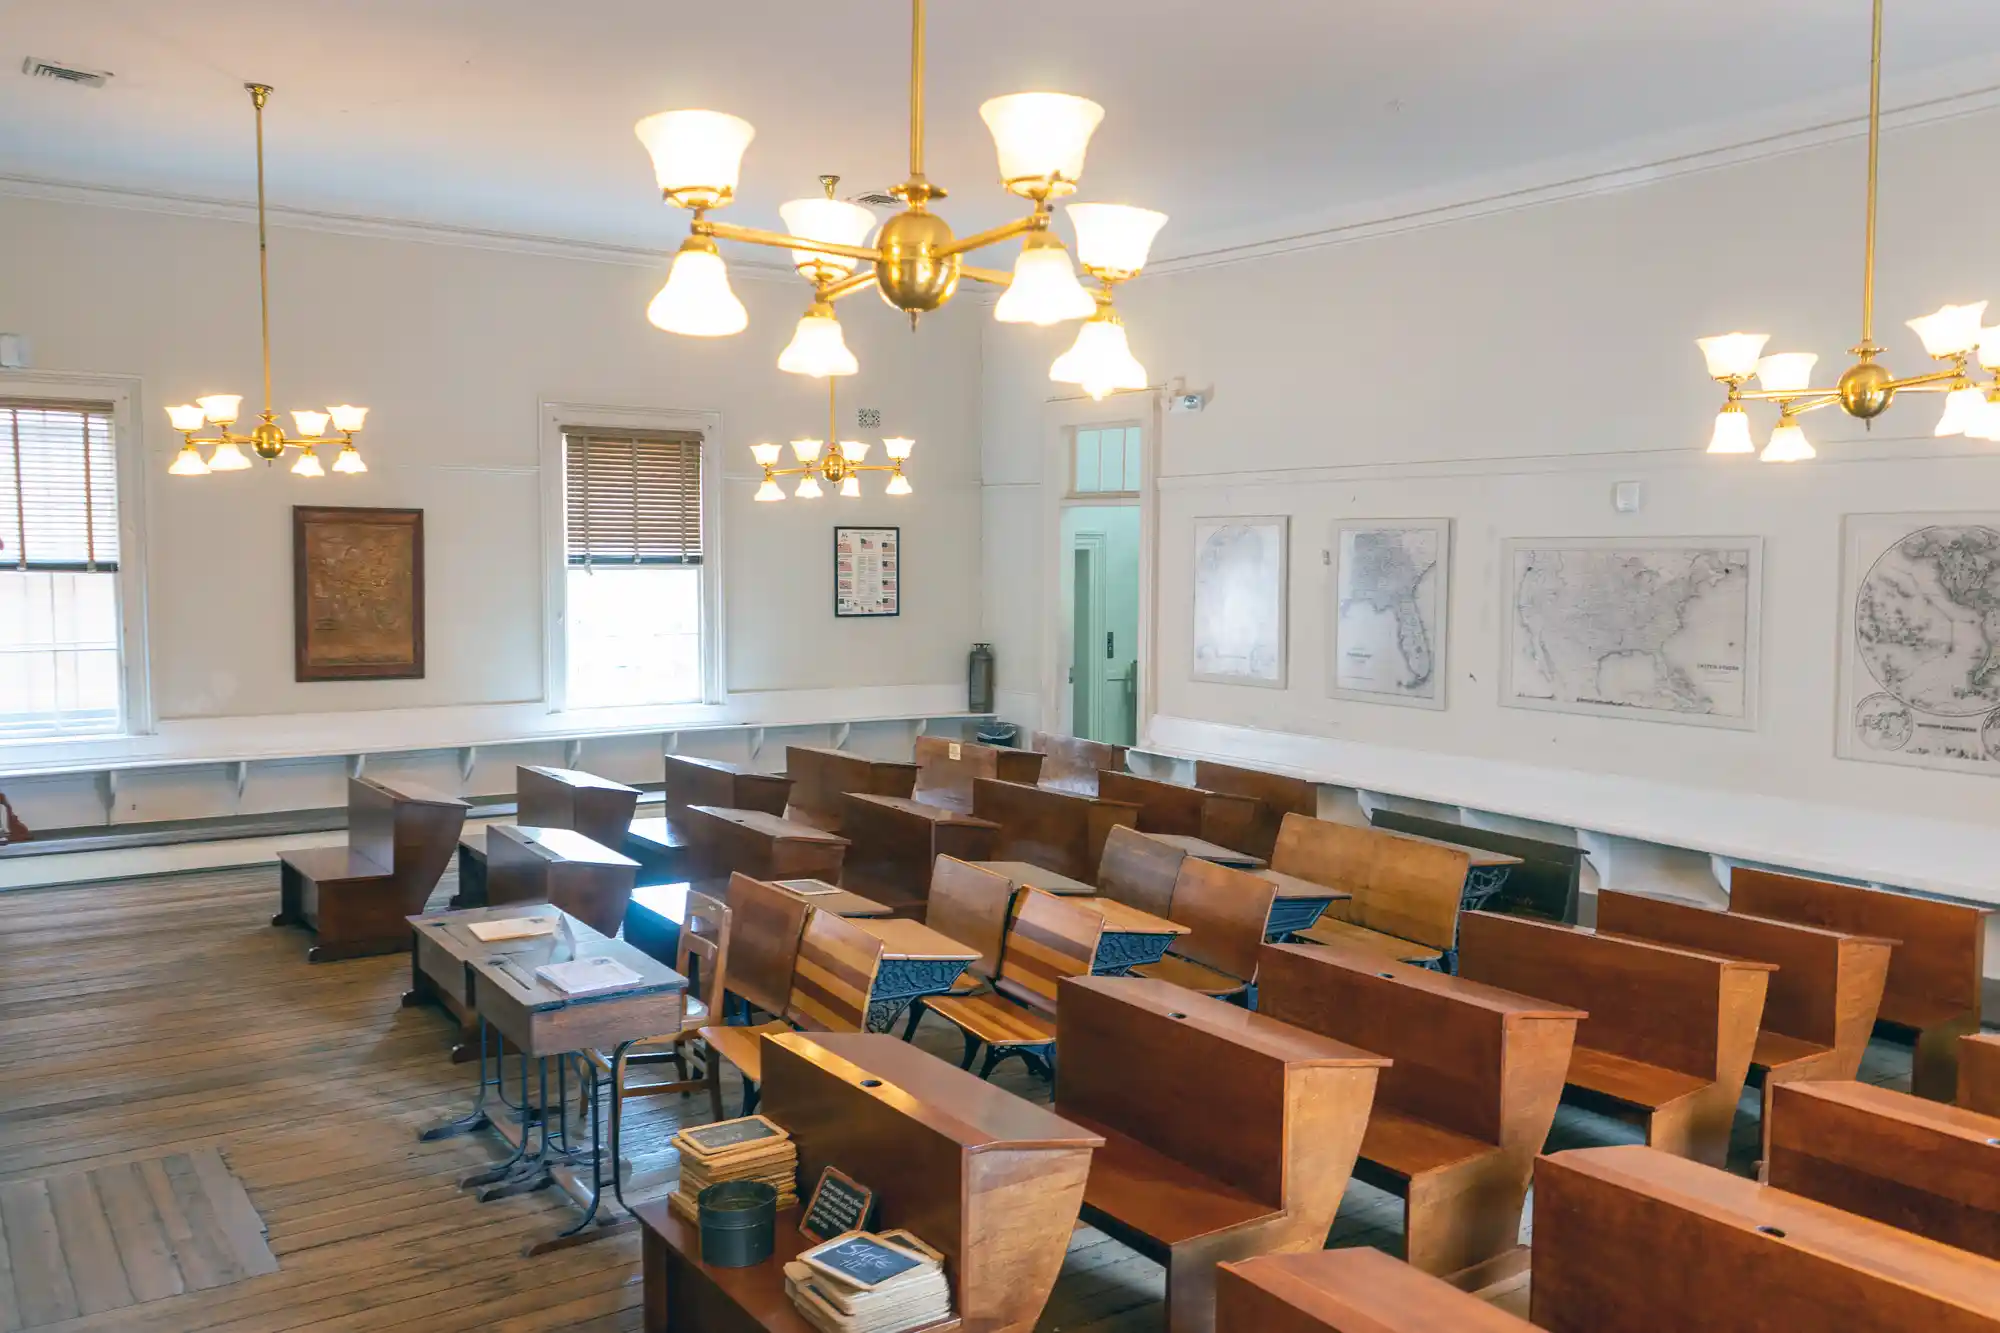 Massie Heritage Center old style classroom with chandeliers in Savannah